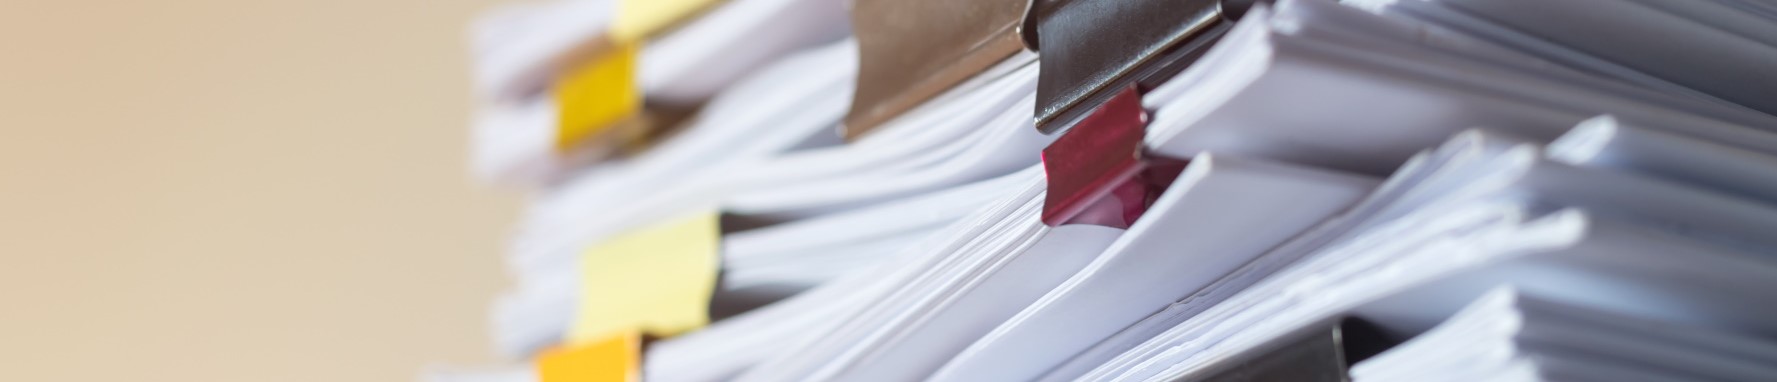 Image of a stack of documents